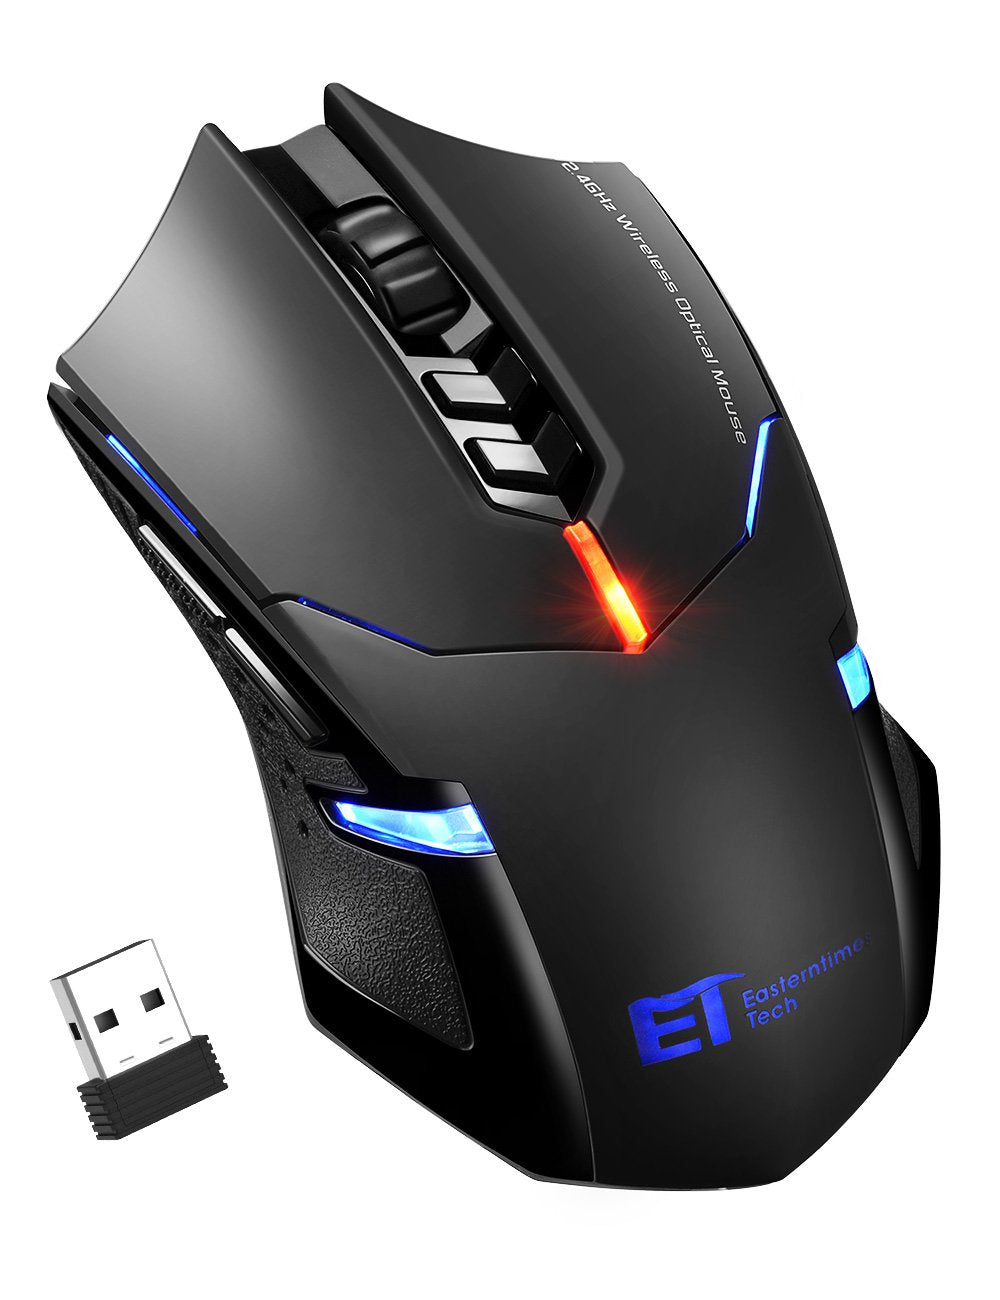 Wireless Gaming Mouse,Vollion 2.4G USB Cordless Computer Mouse with 7 Silent Click Buttons,5 Adjustable DPI, USB Receiver,Ergonomic RGB LED Optical Gamer Mice Mouse for Laptop PC/Mac,Black